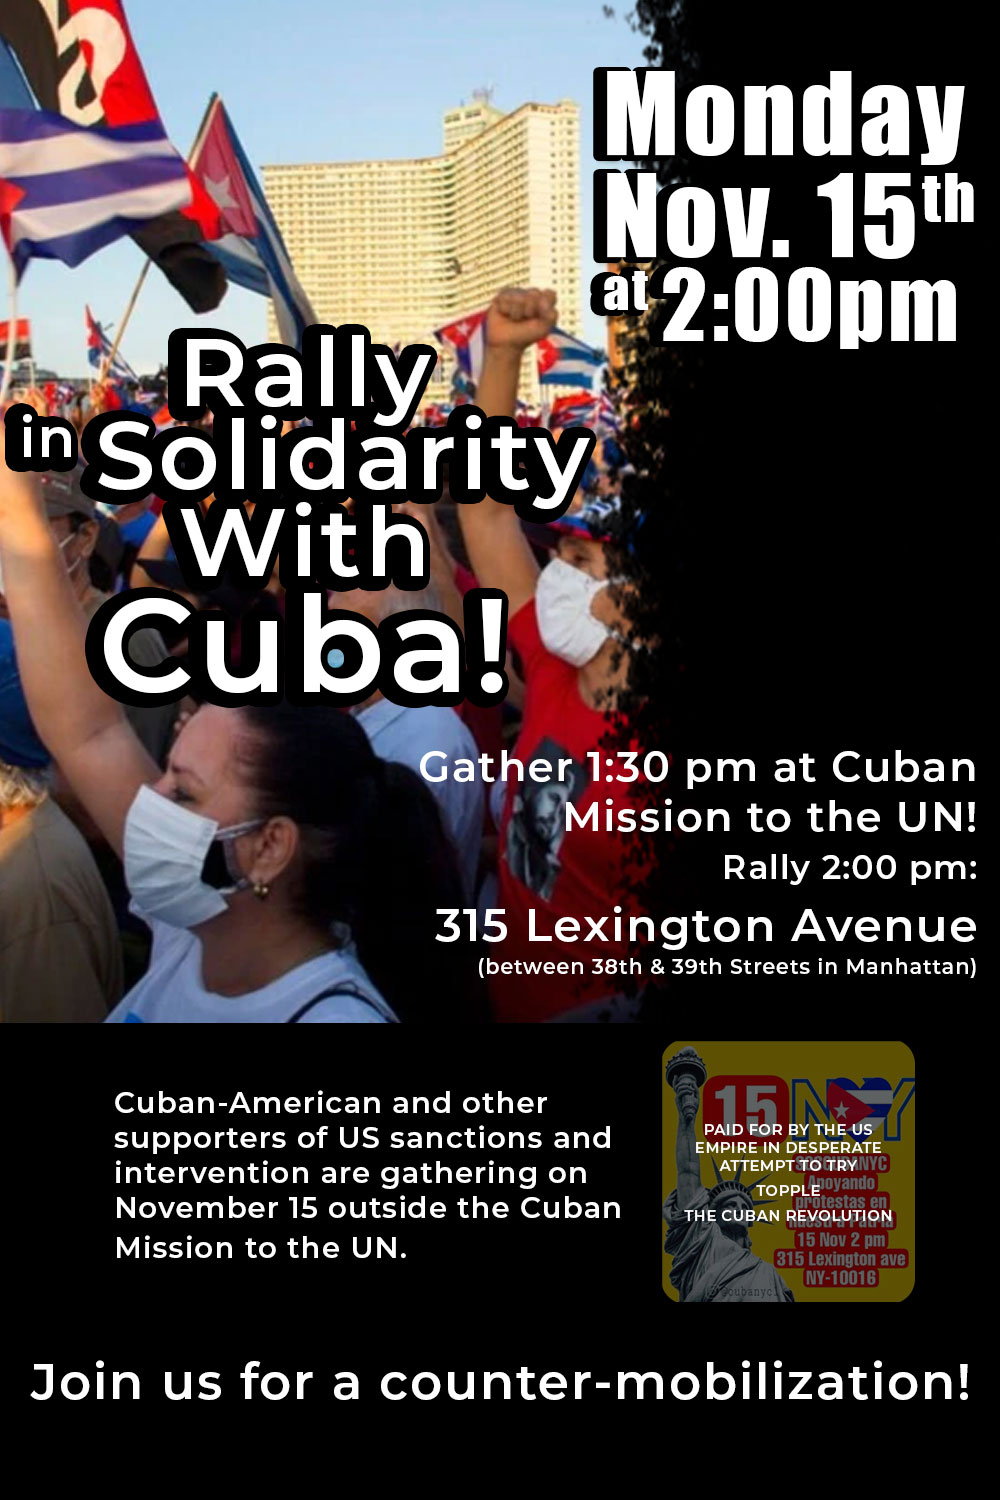 Rally in Solidarity With Cuba! – MONDAY, NOV.15TH AT 2:00PM